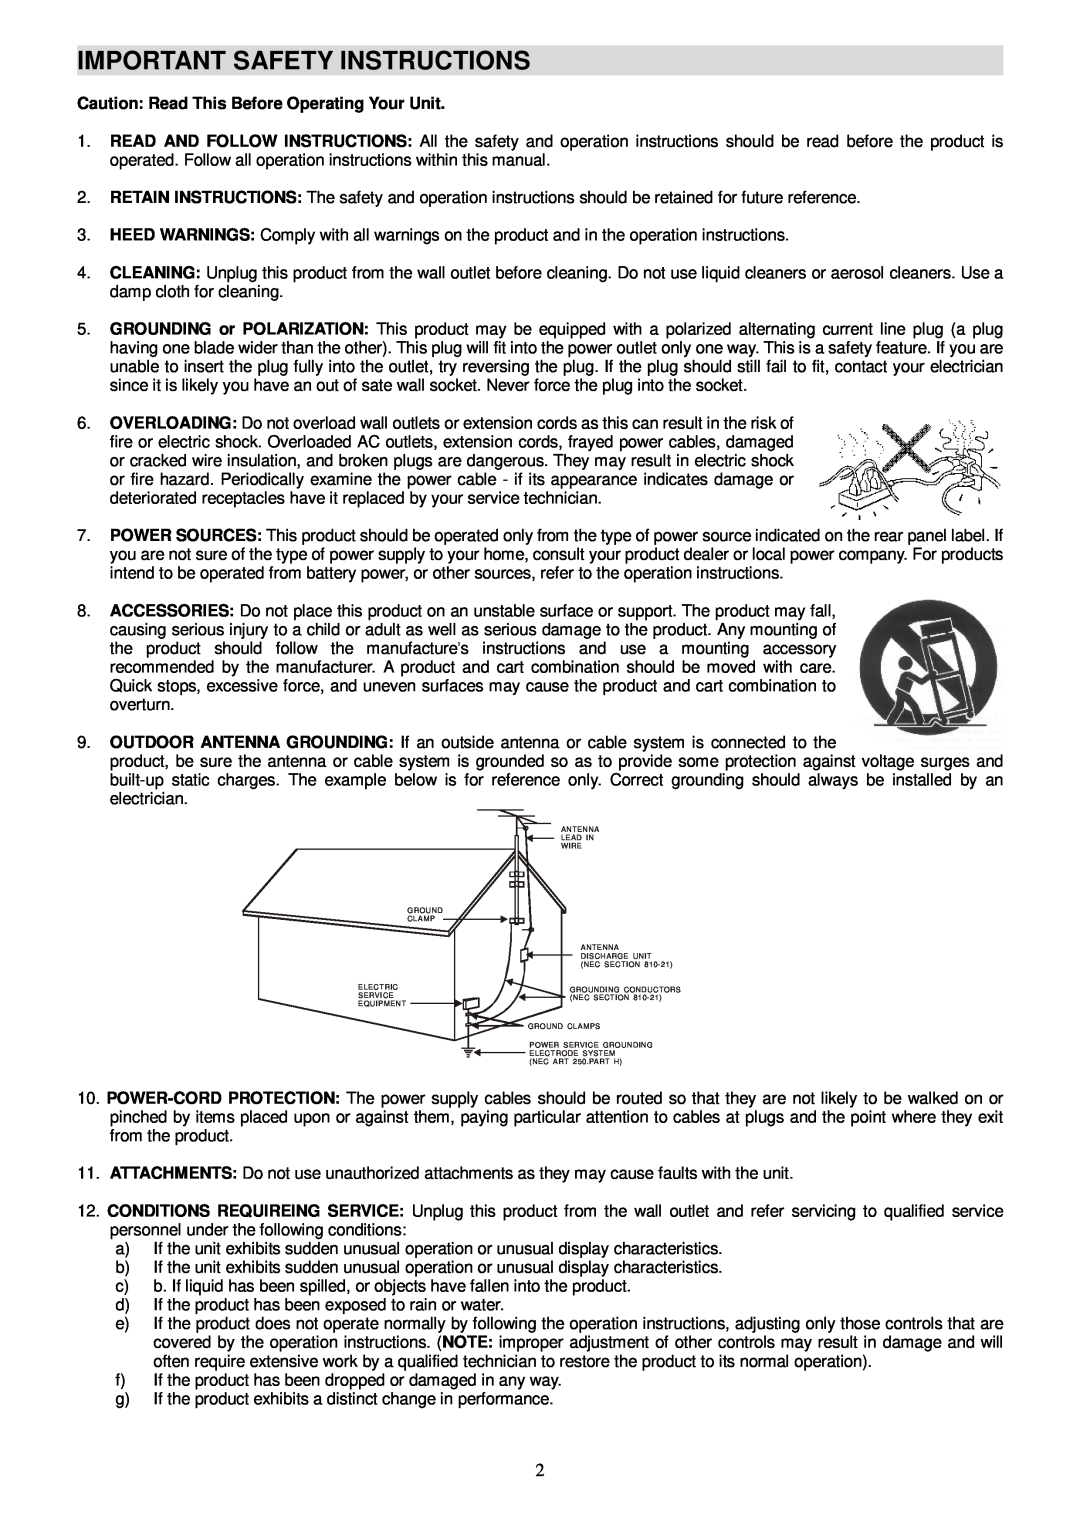 Radio Shack PT-990A manual Important Safety Instructions, Caution Read This Before Operating Your Unit 